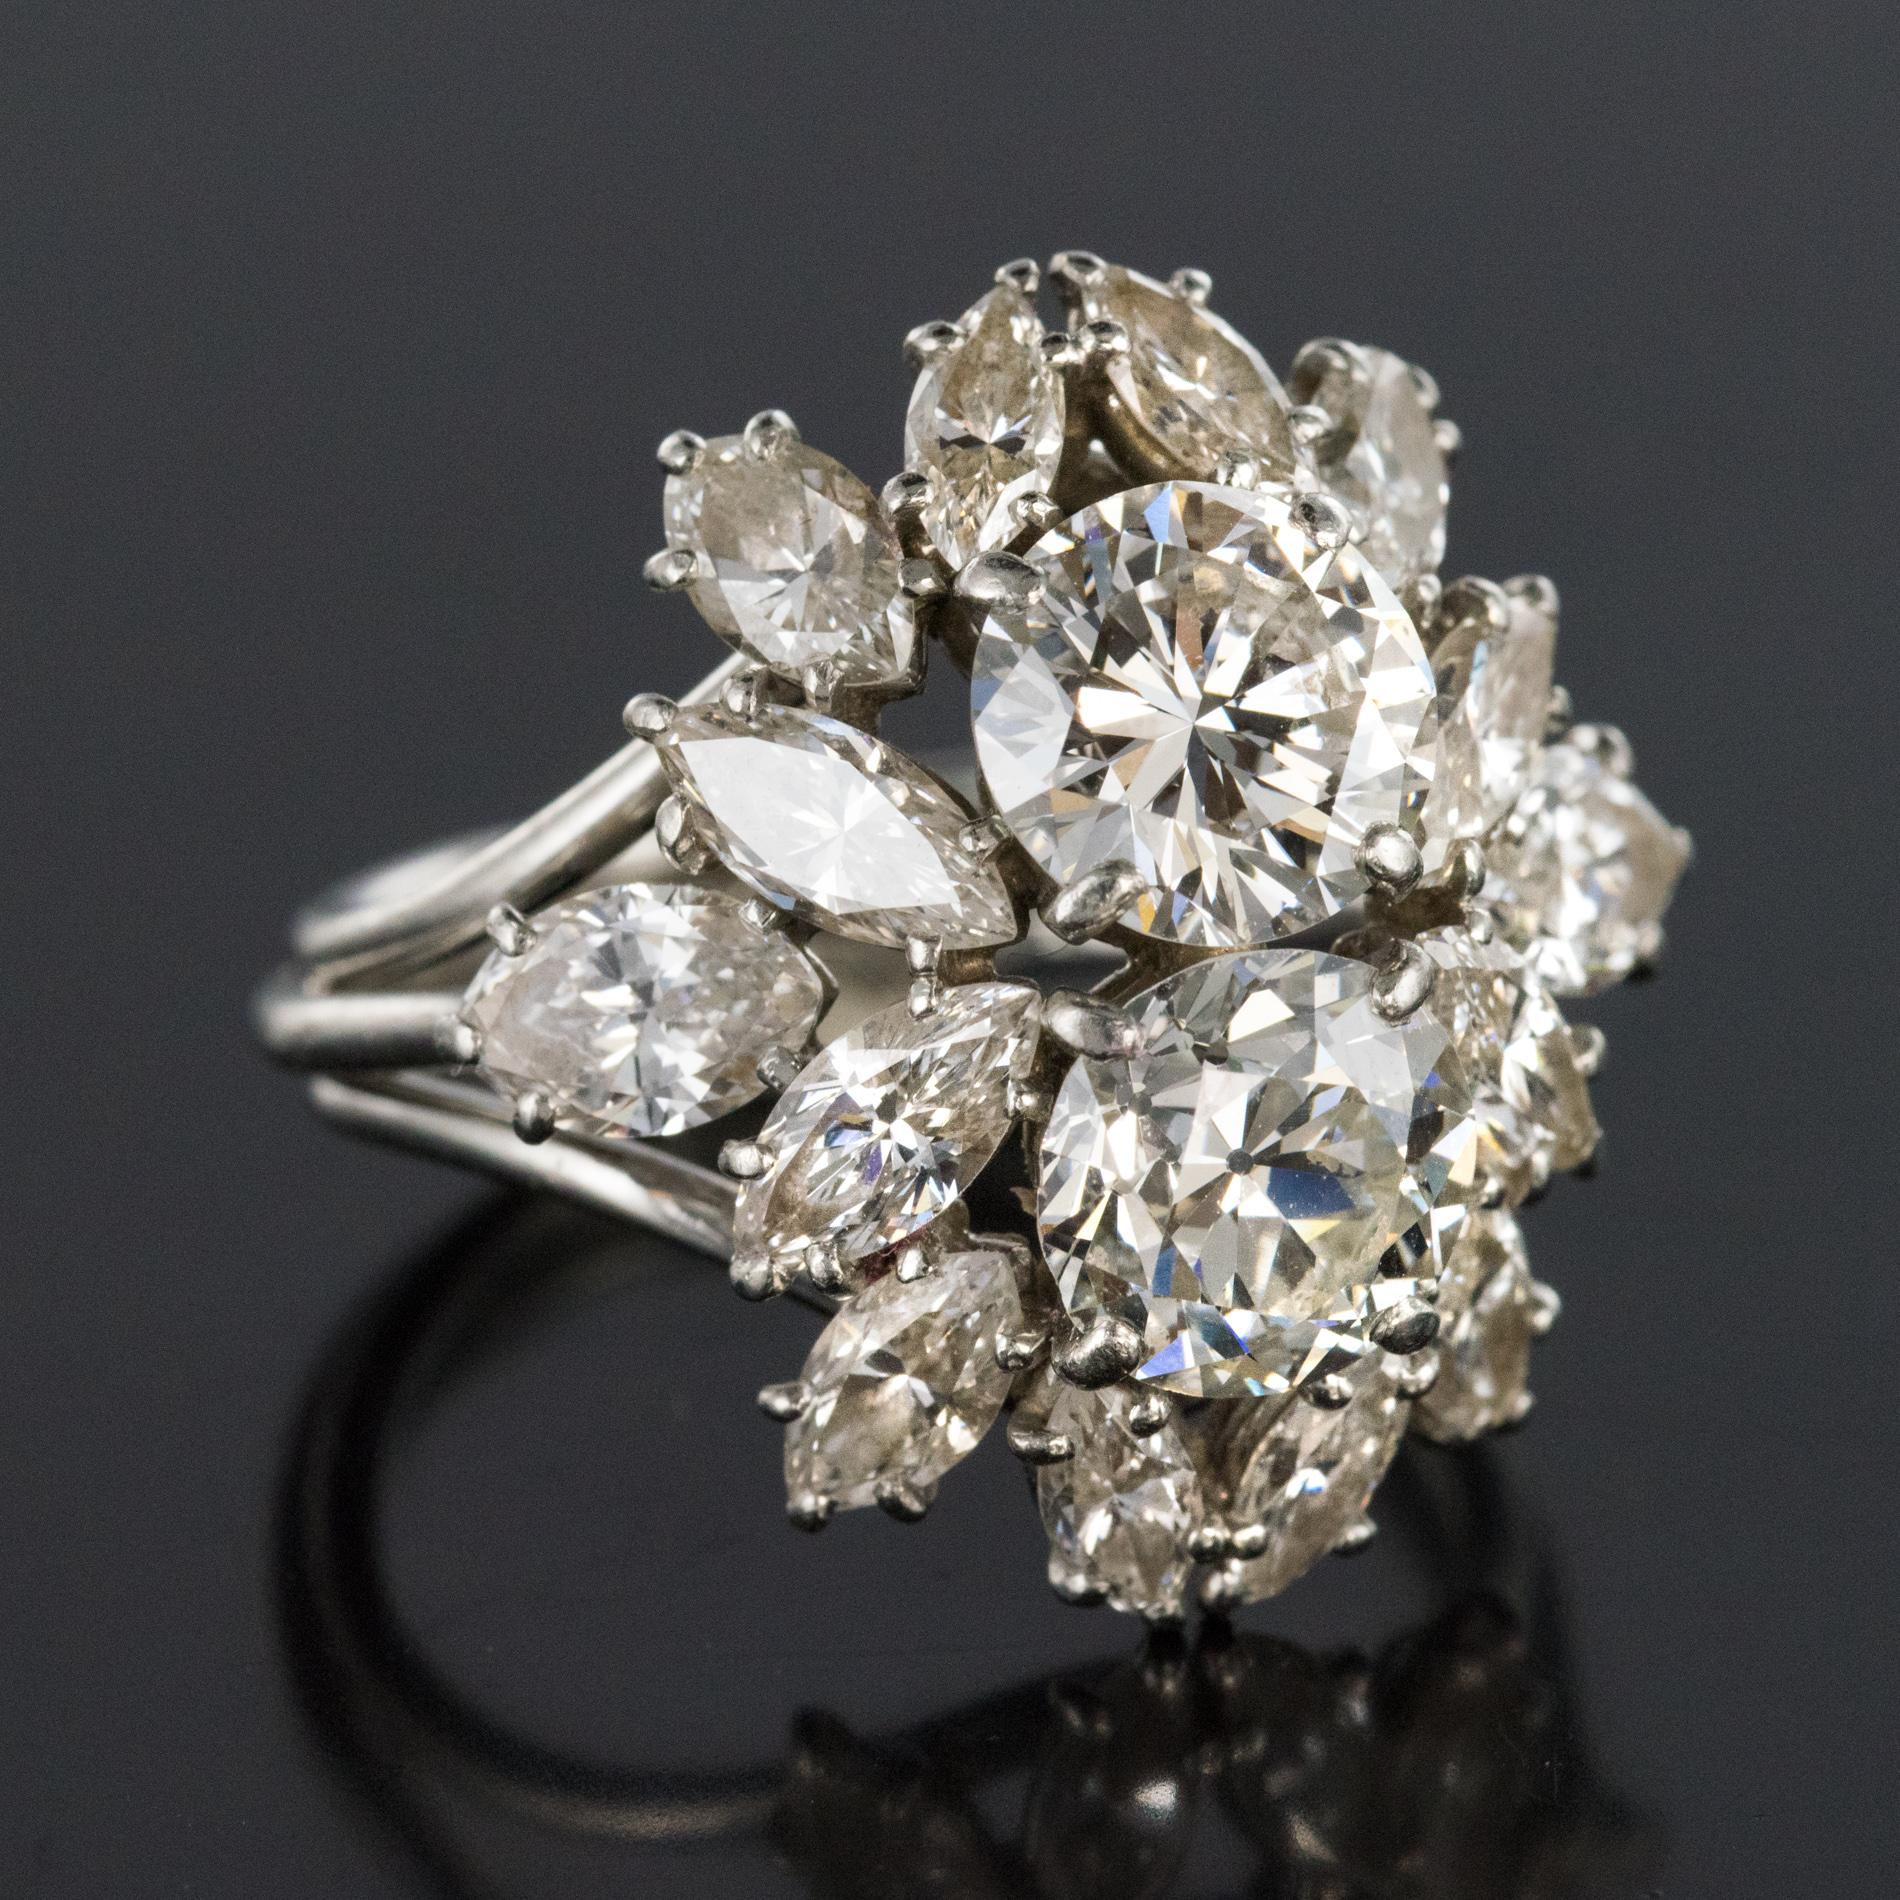 1950s French Cartier 7 Carat Diamond Platinum Ring For Sale 2